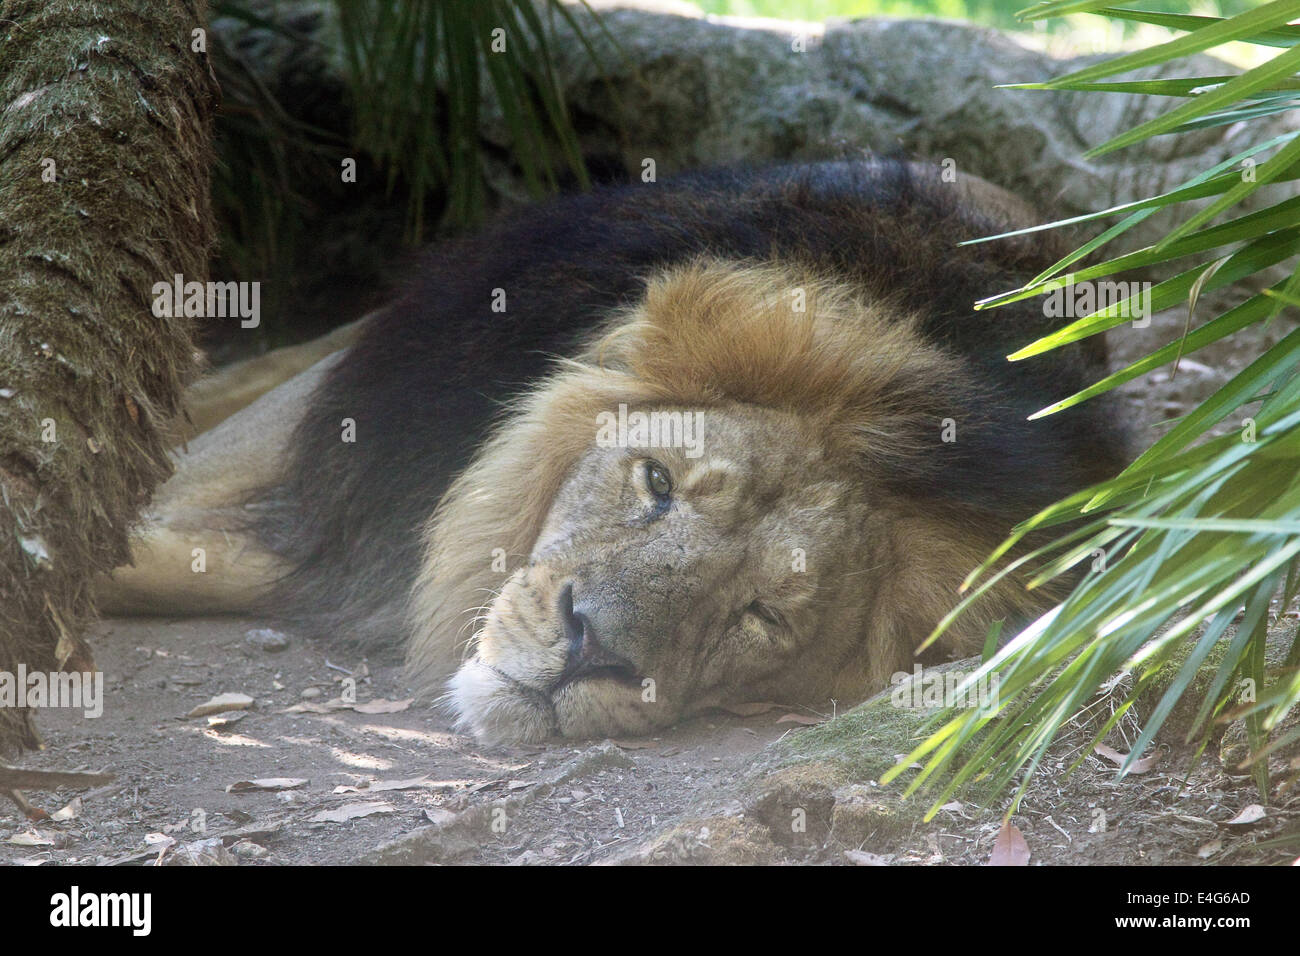 A lion (Panthera leo) is sleeping on the ground between the vegetation Stock Photo